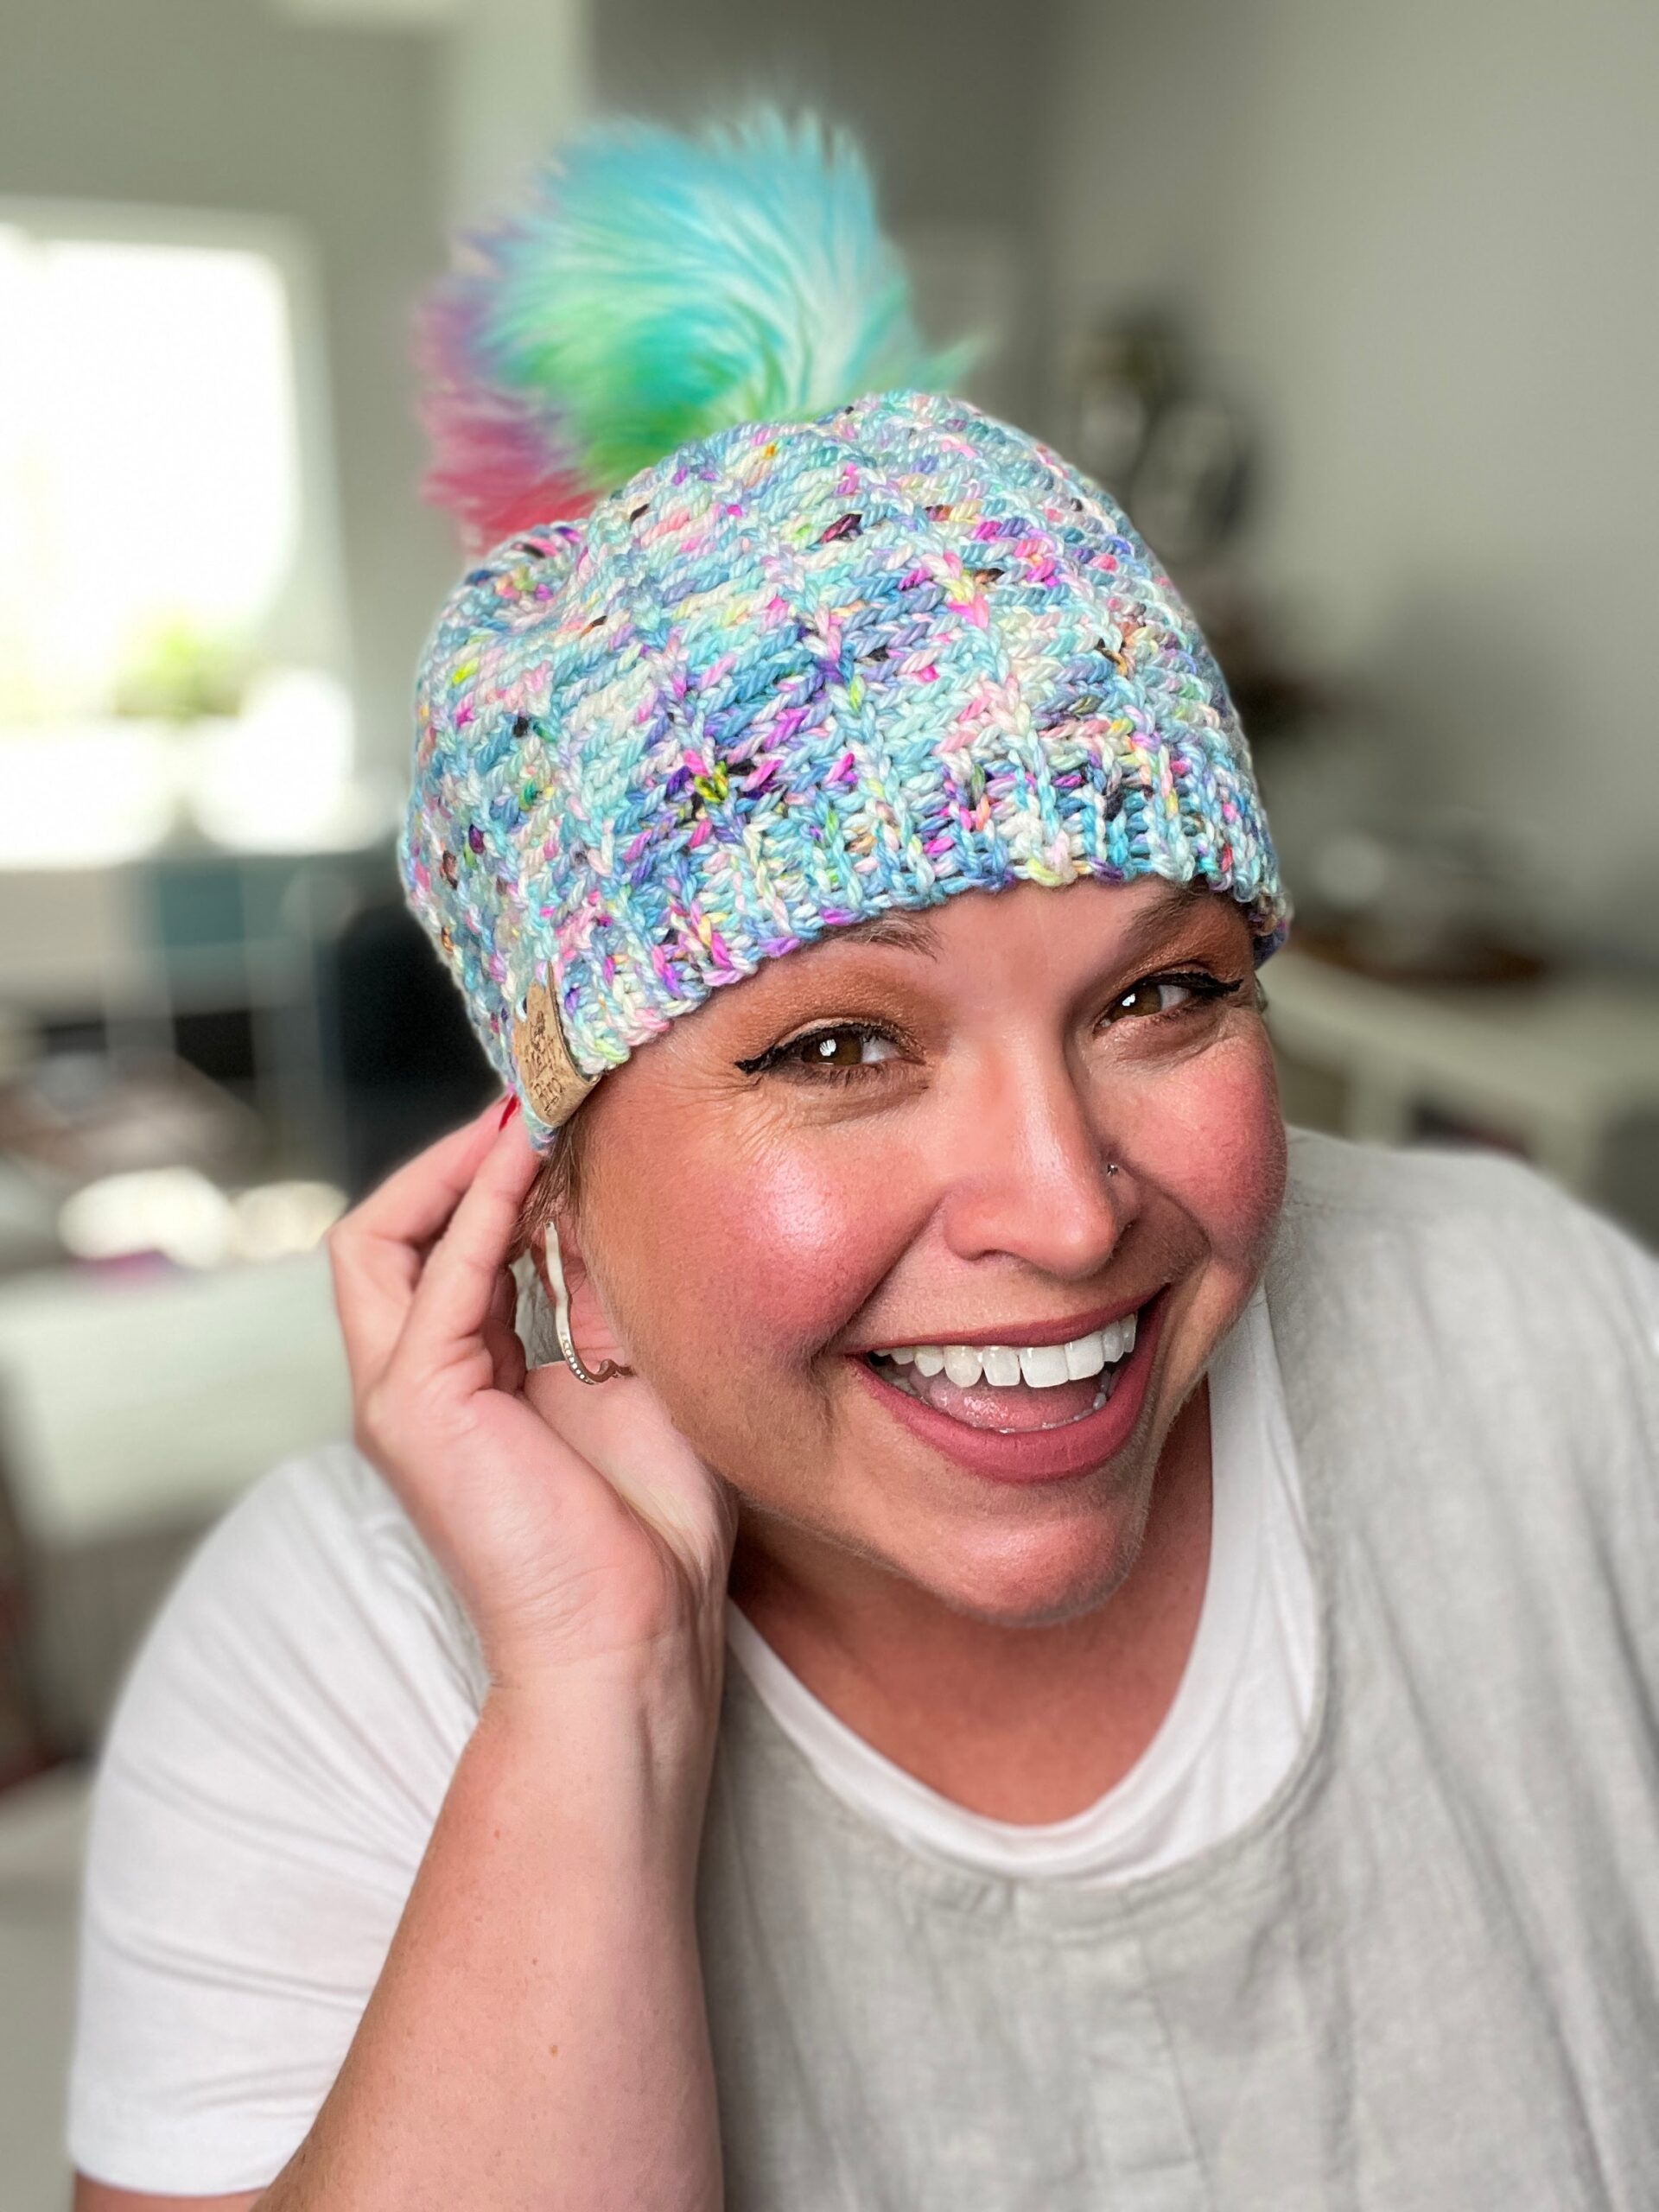 A person smiling broadly, wearing a colorful knit-look crochet hat with a pastel pom-pom. They are indoors with a blurred background that includes furniture and bright light from a window. The person is touching the hat with one hand and has a happy expression. -Marly Bird